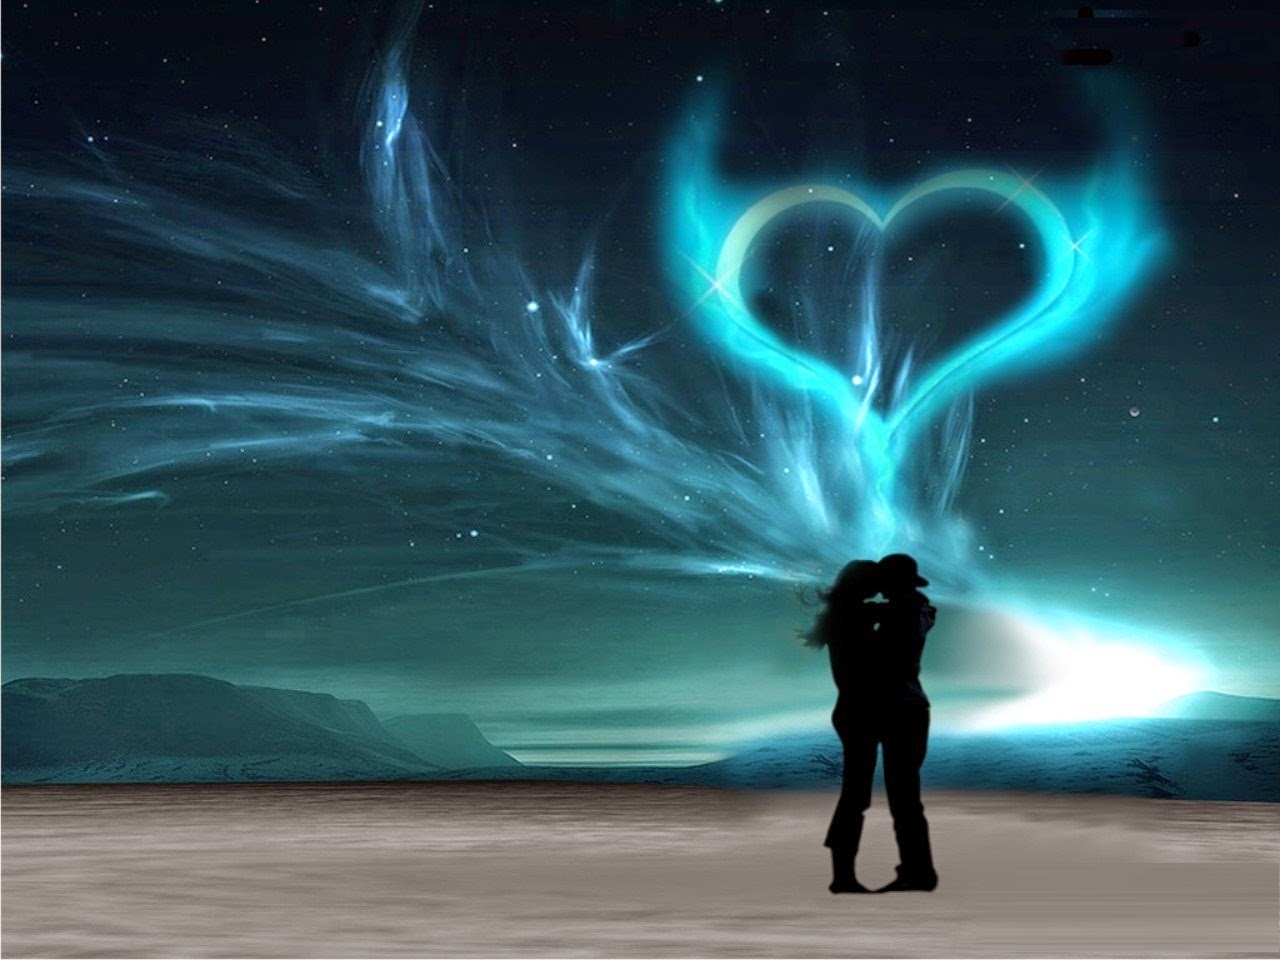 happy kiss day beautiful wallpapers,light,sky,atmosphere,space,aurora